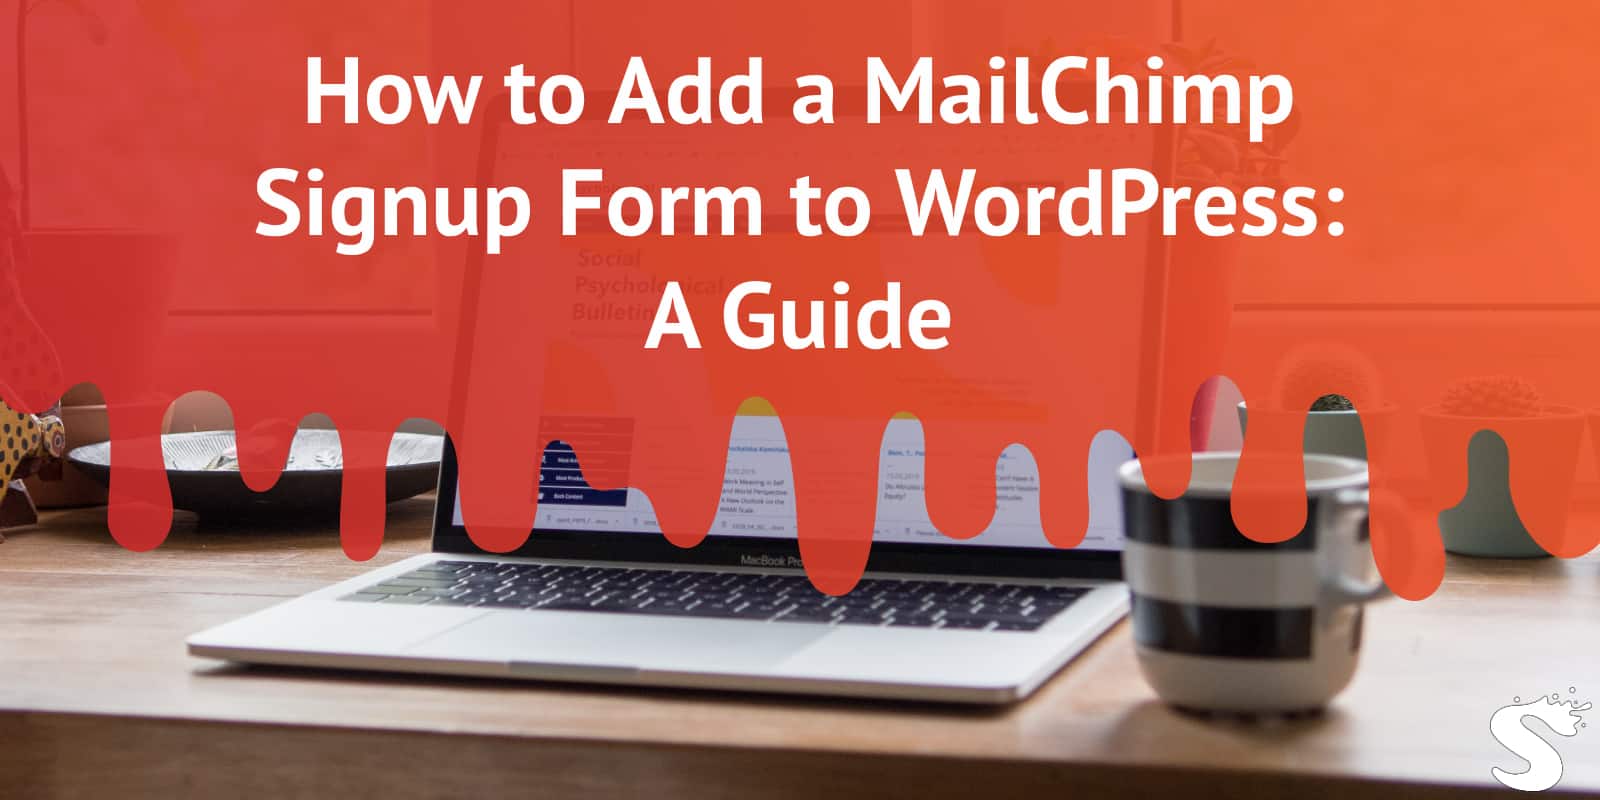 How to Add a MailChimp Signup Form to WordPress: A Guide